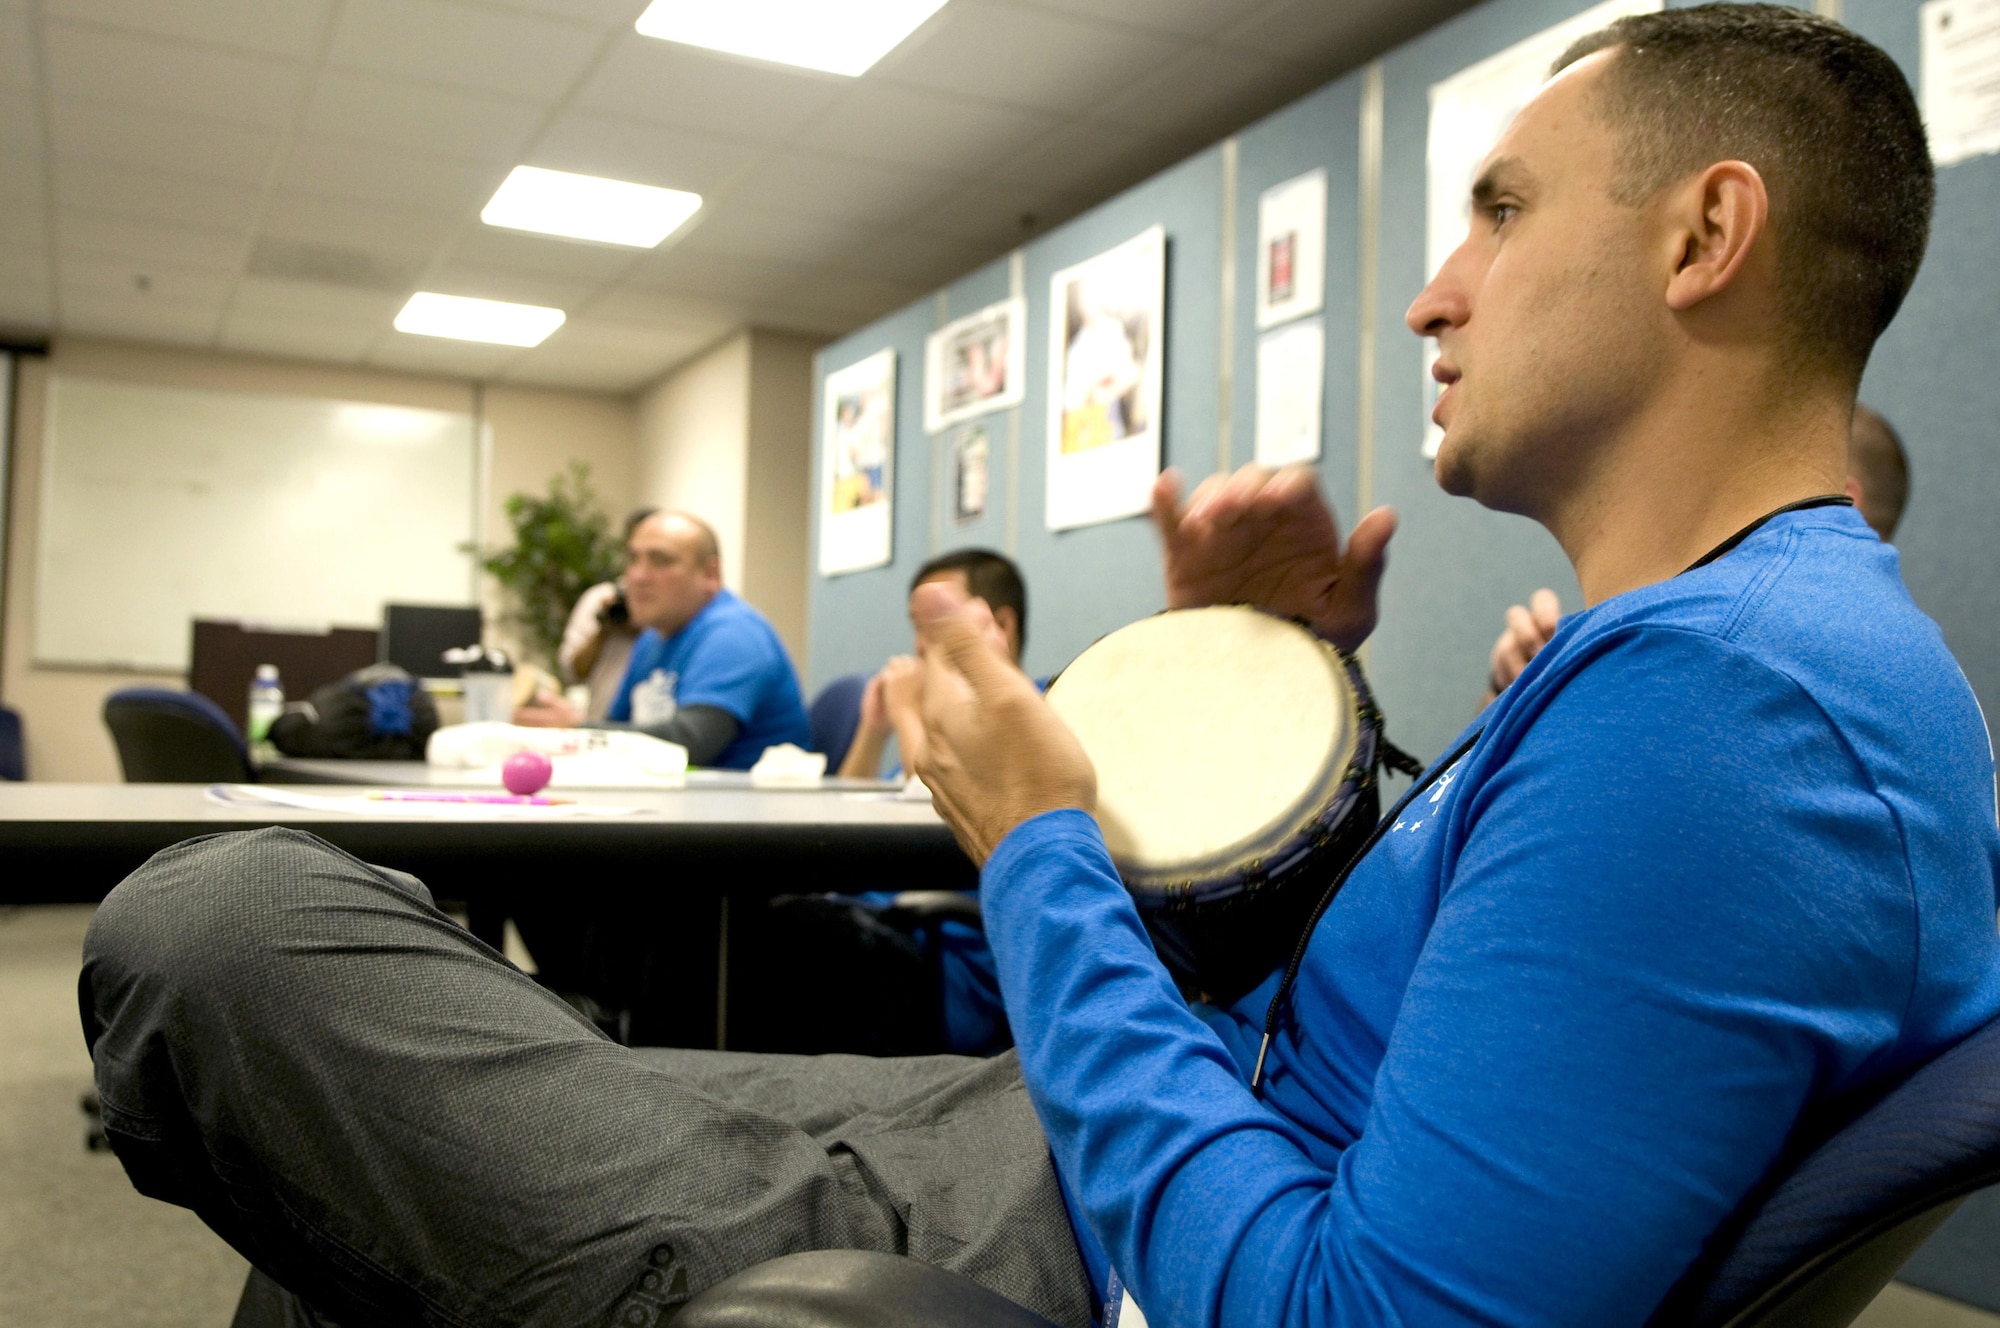 First Sgt. Estevan Vigil taps a bongo as he sings along with other wounded Airmen during a music therapy session Nov. 19, 2015, on Joint Base Andrews, Md., as part of Warrior CARE Month. Airmen had the chance to use a variety of musical instruments and collaborate on songs in the sessions, which were intended to show wounded warriors a unique approach to therapy. (U.S. Air Force photo/Sean Kimmons)